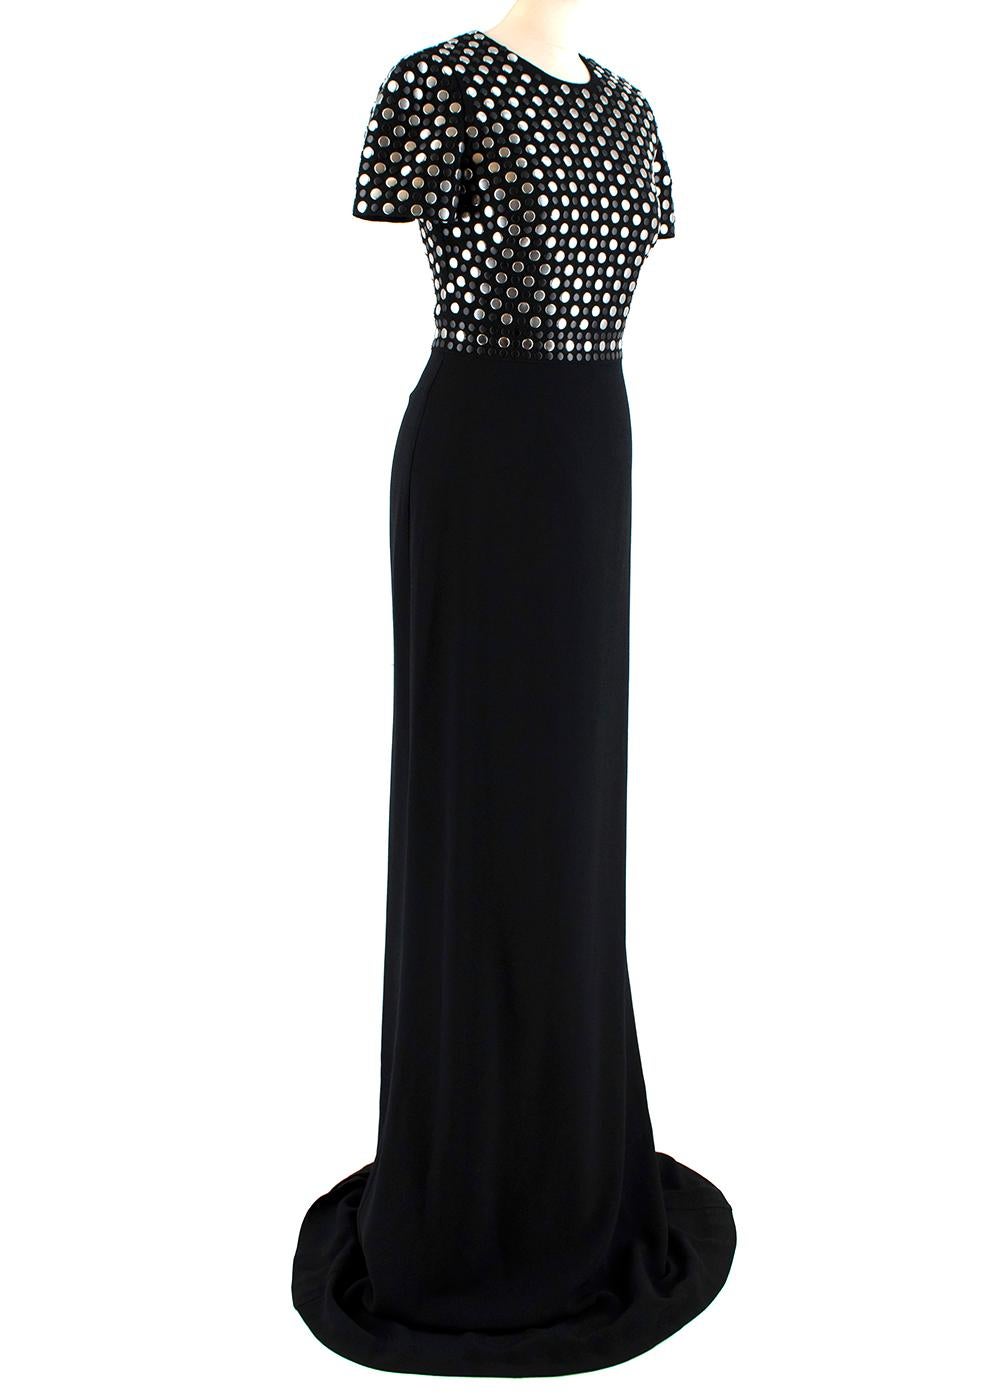 Burberry Black Flat Studded Gown

- Silver tone studs at bodice
- Fully lined
- Back zip closure 
- Heavy weight
- Short sleeved
- Rounded neckline

Materials:
Main:
- 51% Acetate
- 49% Viscose
Lining:
- 95% Viscose
- 5% Elastane
Decorations:
- 100%